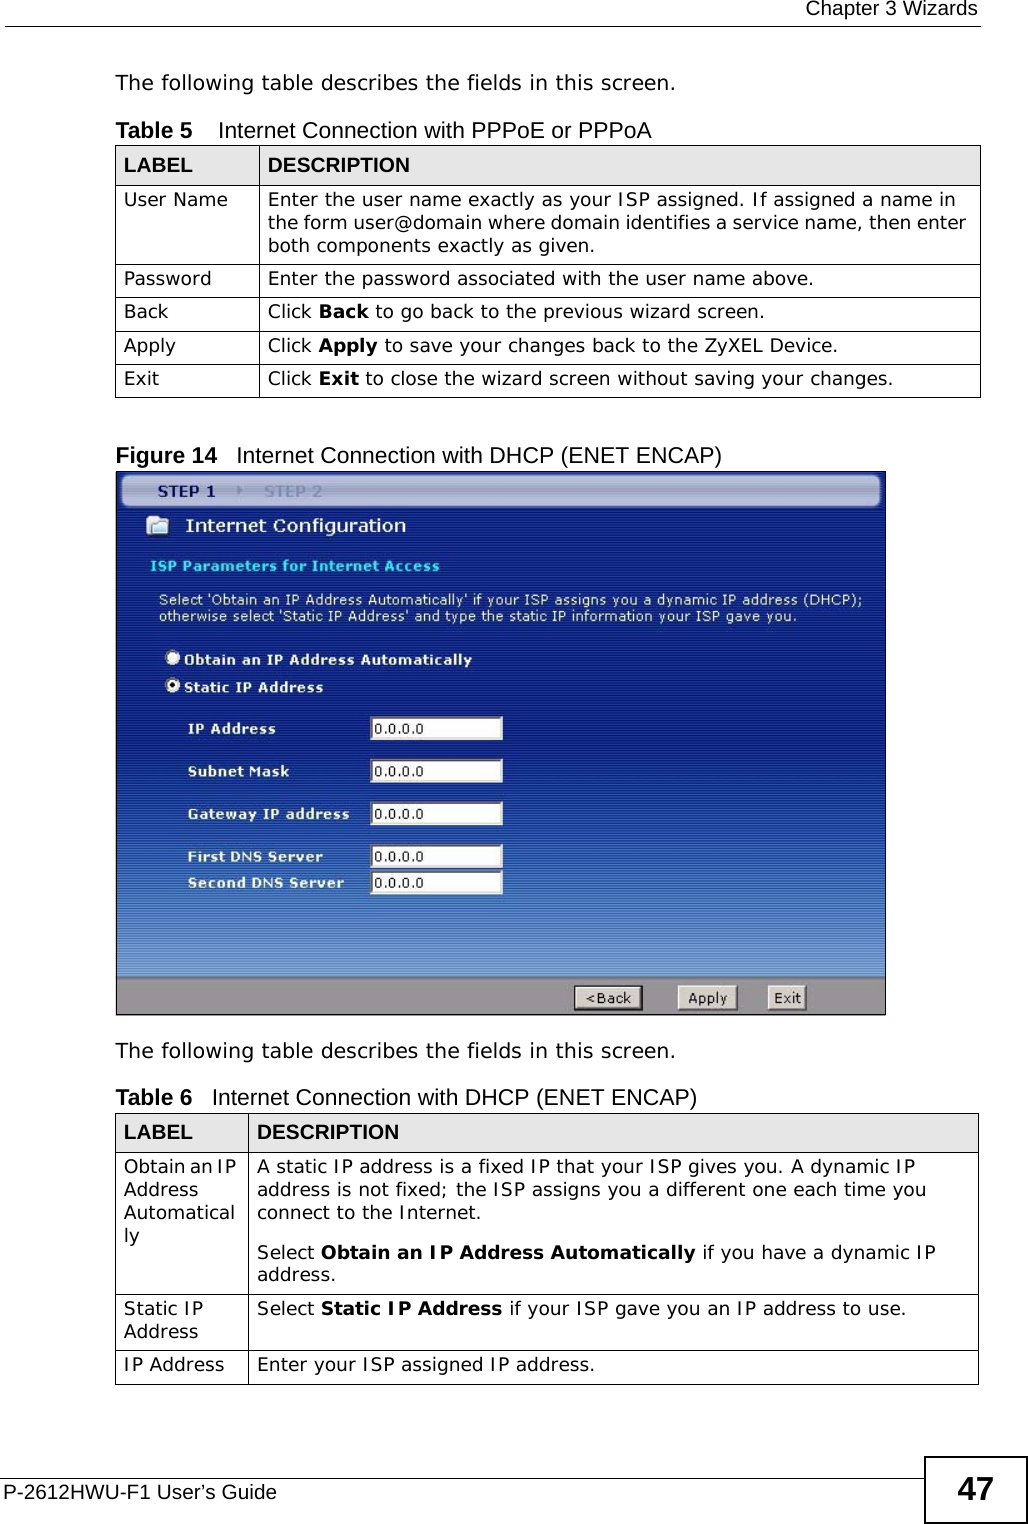  Chapter 3 WizardsP-2612HWU-F1 User’s Guide 47The following table describes the fields in this screen.Figure 14   Internet Connection with DHCP (ENET ENCAP) The following table describes the fields in this screen.Table 5    Internet Connection with PPPoE or PPPoALABEL DESCRIPTIONUser Name Enter the user name exactly as your ISP assigned. If assigned a name in the form user@domain where domain identifies a service name, then enter both components exactly as given.Password Enter the password associated with the user name above.Back Click Back to go back to the previous wizard screen.Apply Click Apply to save your changes back to the ZyXEL Device.Exit Click Exit to close the wizard screen without saving your changes.Table 6   Internet Connection with DHCP (ENET ENCAP)LABEL DESCRIPTIONObtain an IP Address AutomaticallyA static IP address is a fixed IP that your ISP gives you. A dynamic IP address is not fixed; the ISP assigns you a different one each time you connect to the Internet.Select Obtain an IP Address Automatically if you have a dynamic IP address.Static IP Address Select Static IP Address if your ISP gave you an IP address to use.IP Address Enter your ISP assigned IP address.